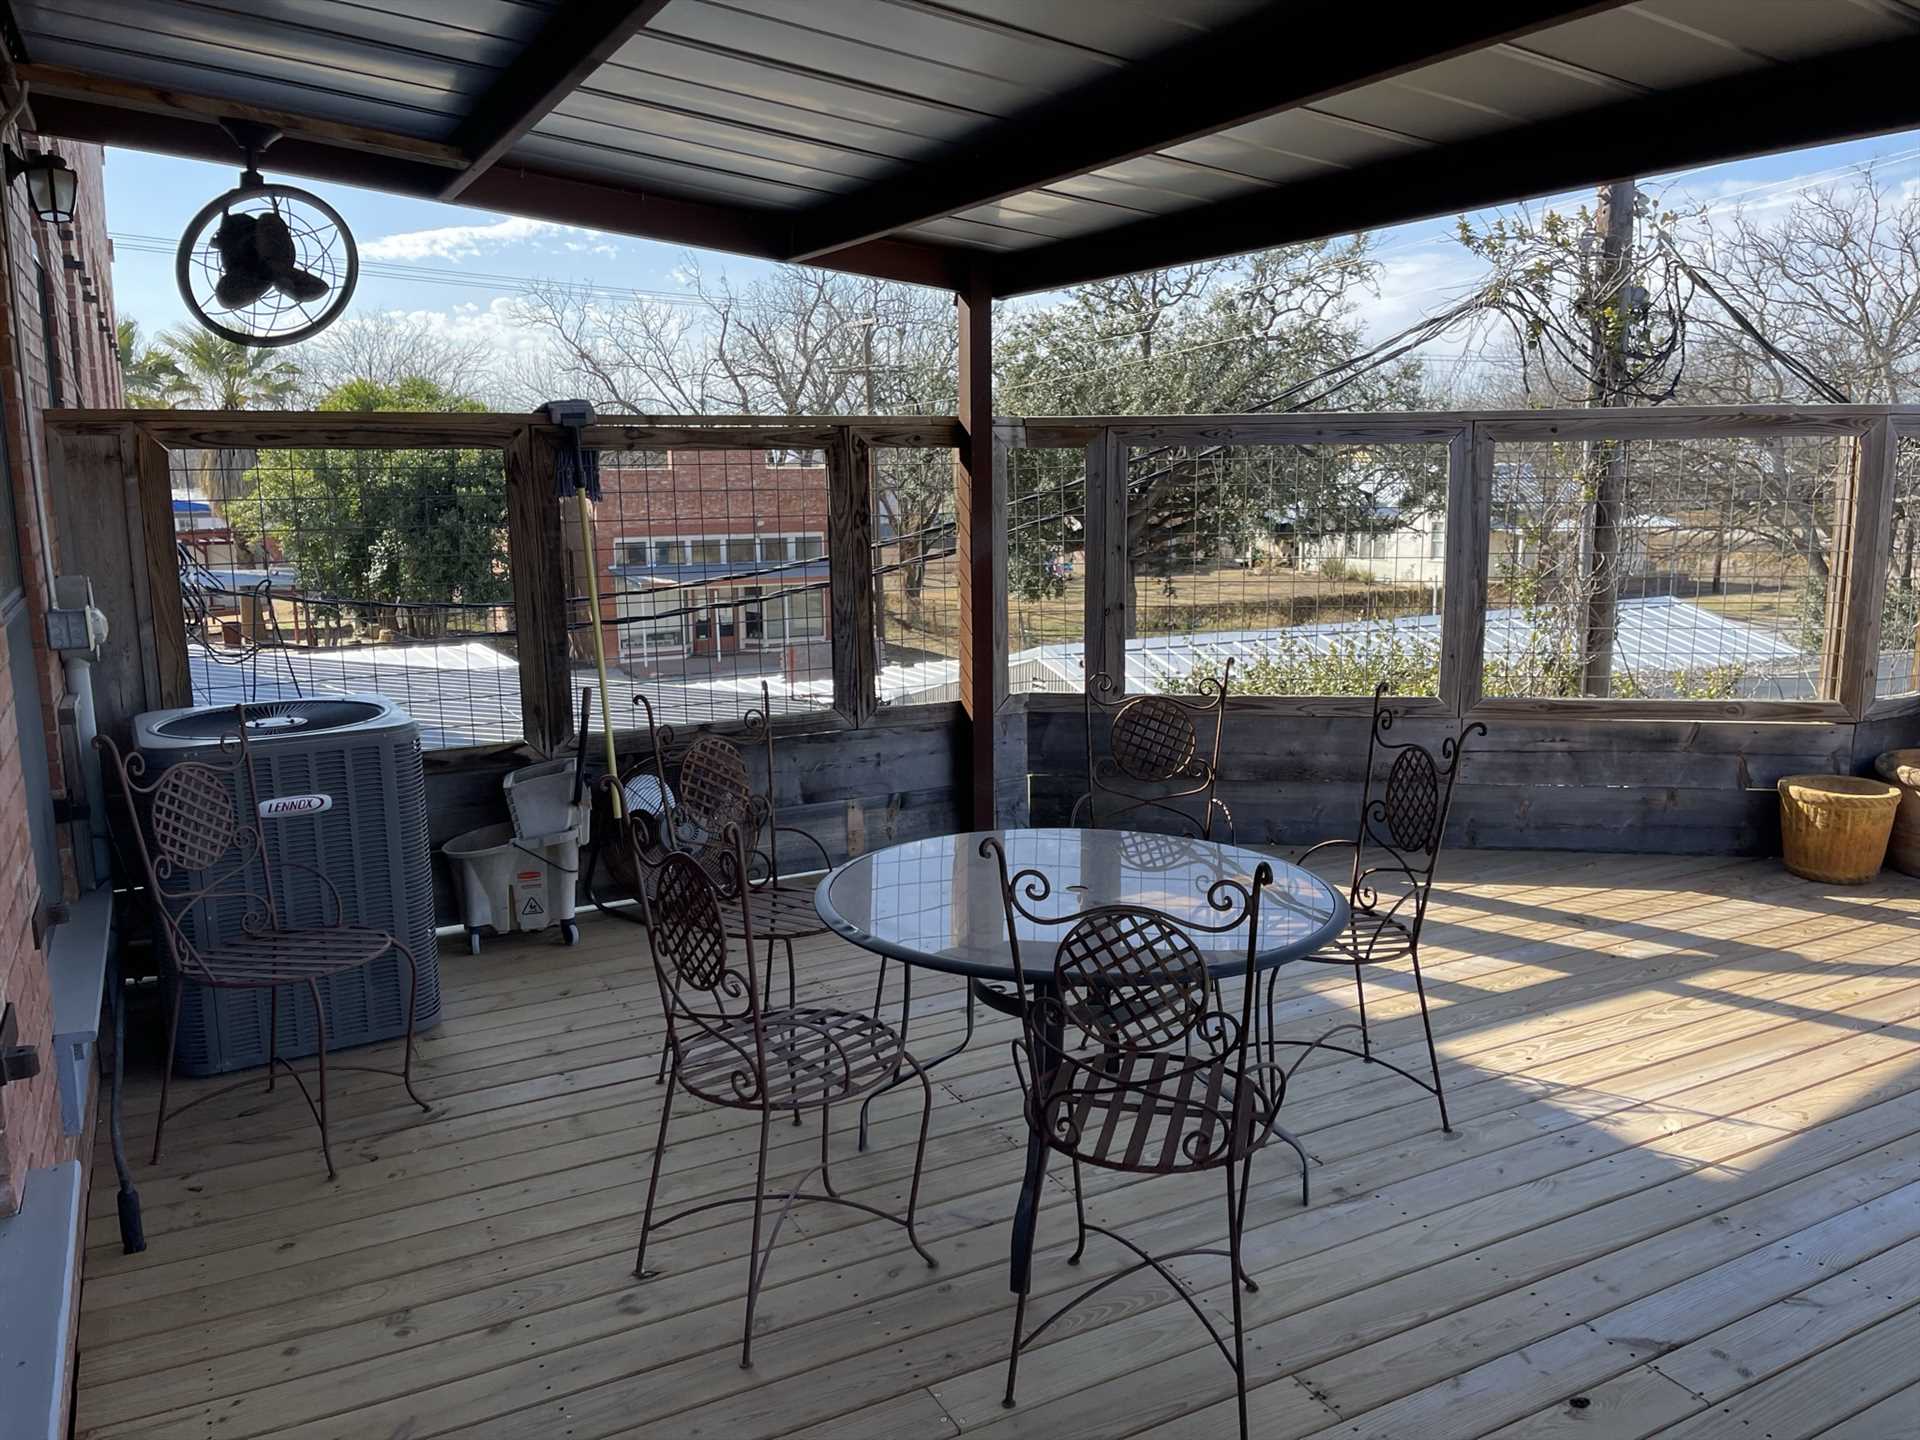                                                 Savor some fresh-air time with class on the big, shaded deck! There's also a gas grill for hearty BBQ cookouts.